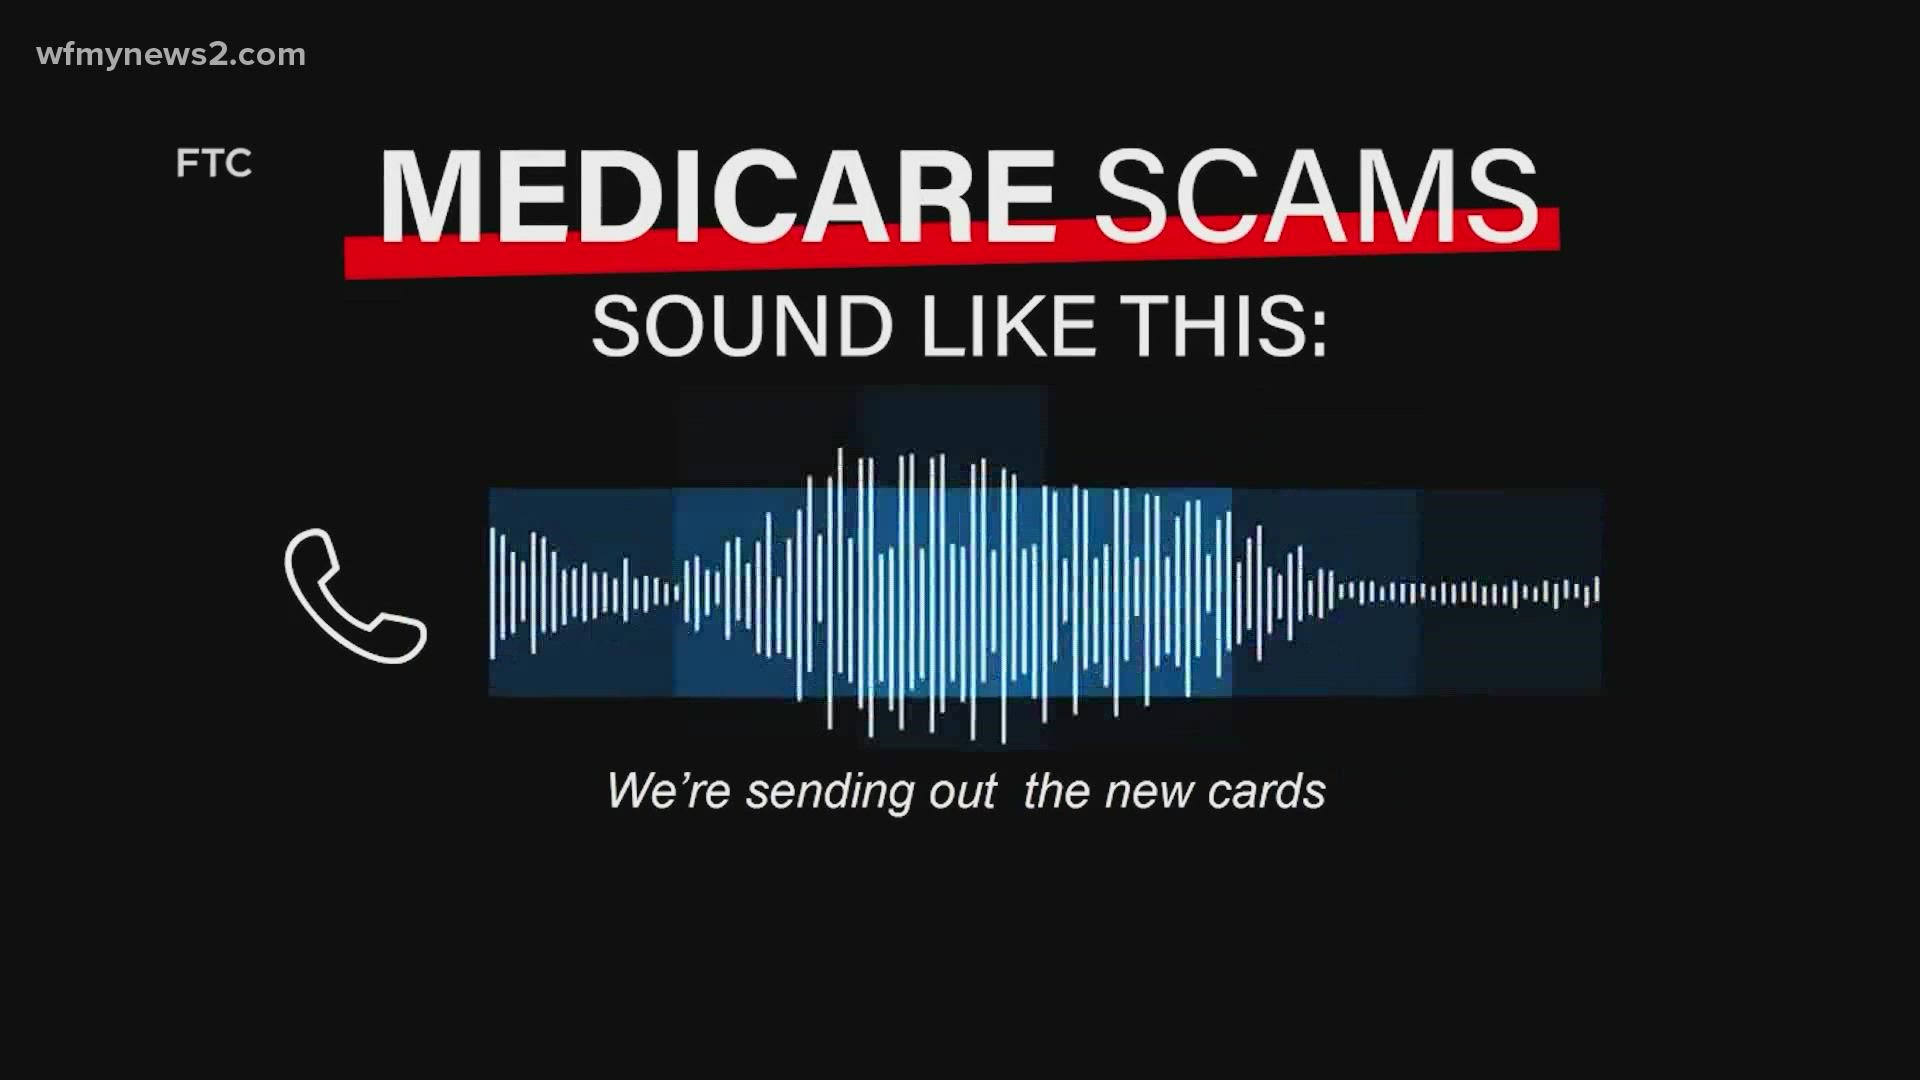 The AARP estimates 60 million Americans will receive a fake call warning people they’re ineligible for Medicare coverage.